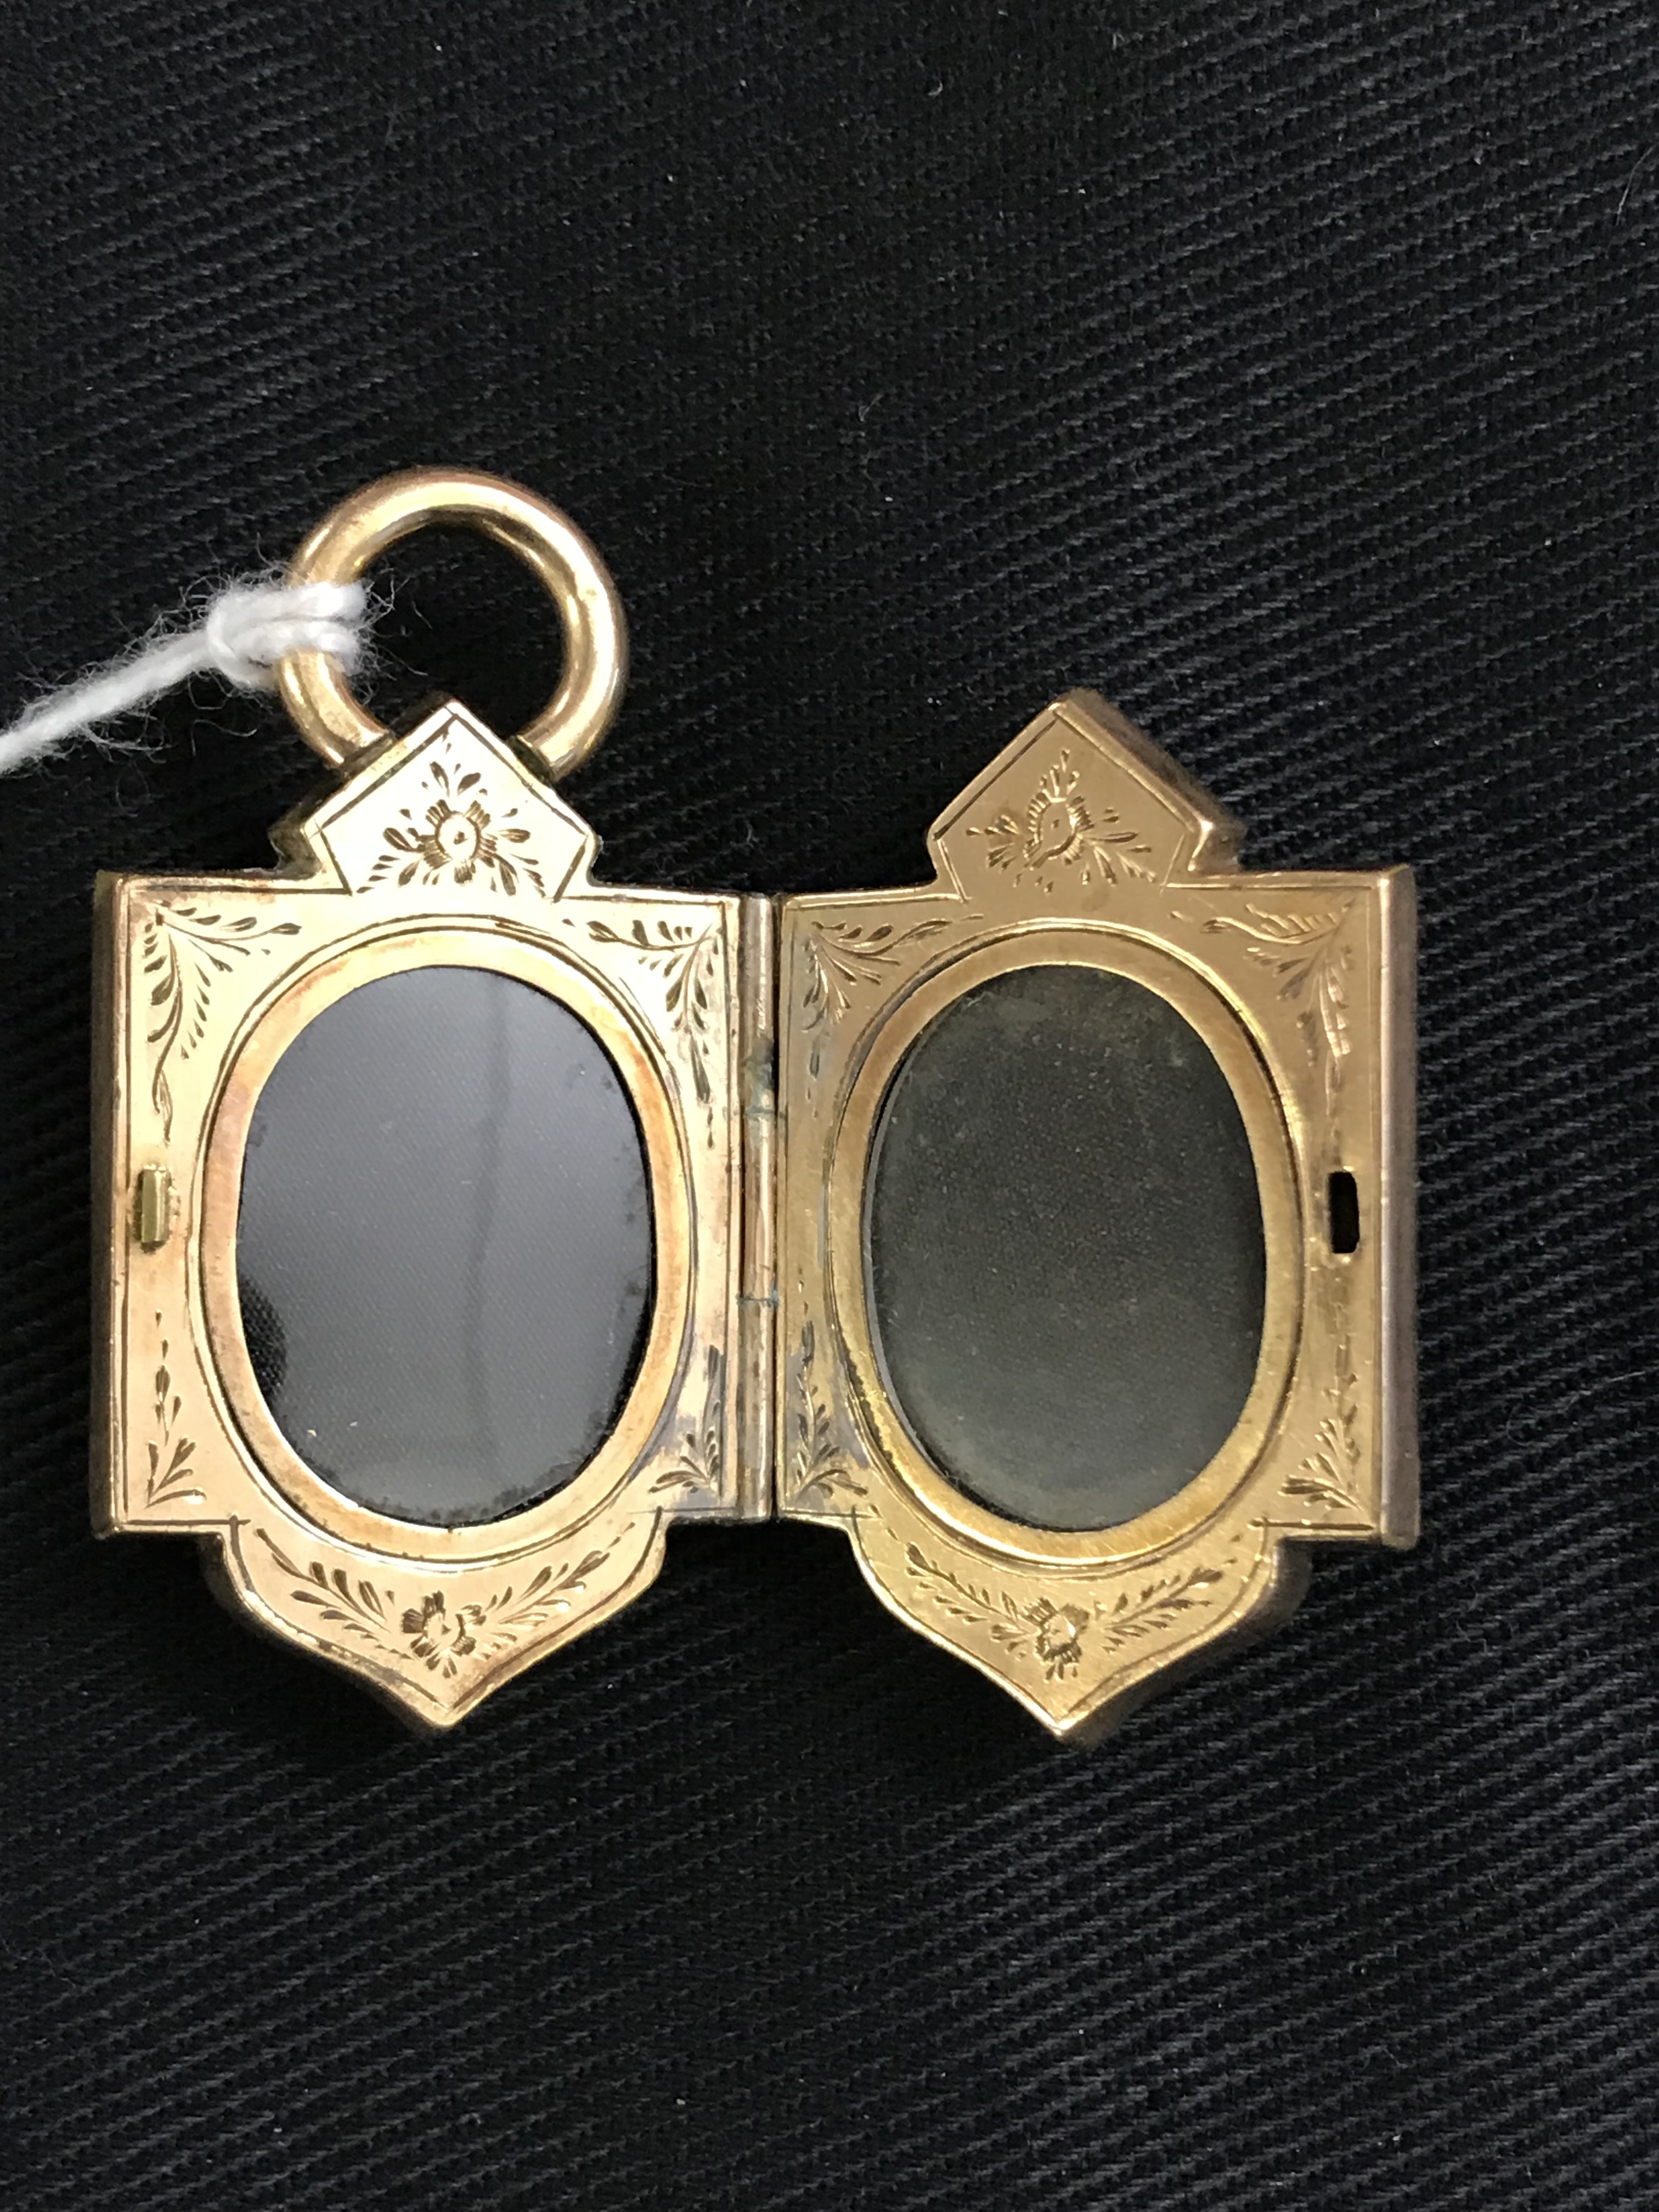 19th cent. Yellow Metal Jewellery: Gothic style floral engraved locket, opens to reveal 2 oval - Bild 2 aus 2